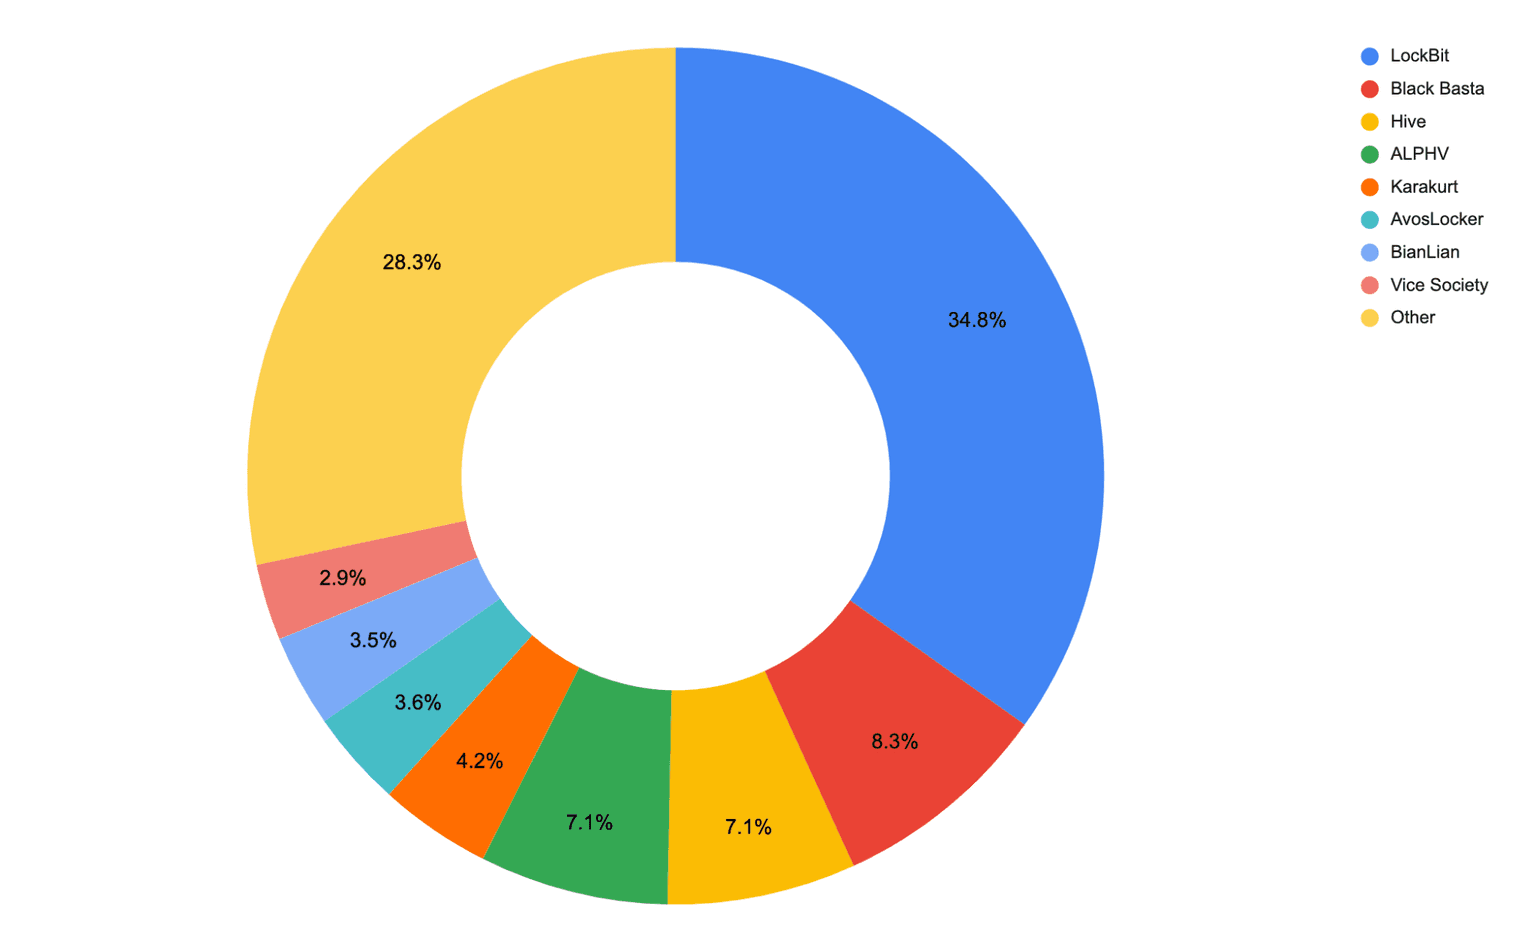 Q3 2022 Distribution of Ransomware Attacks by Group